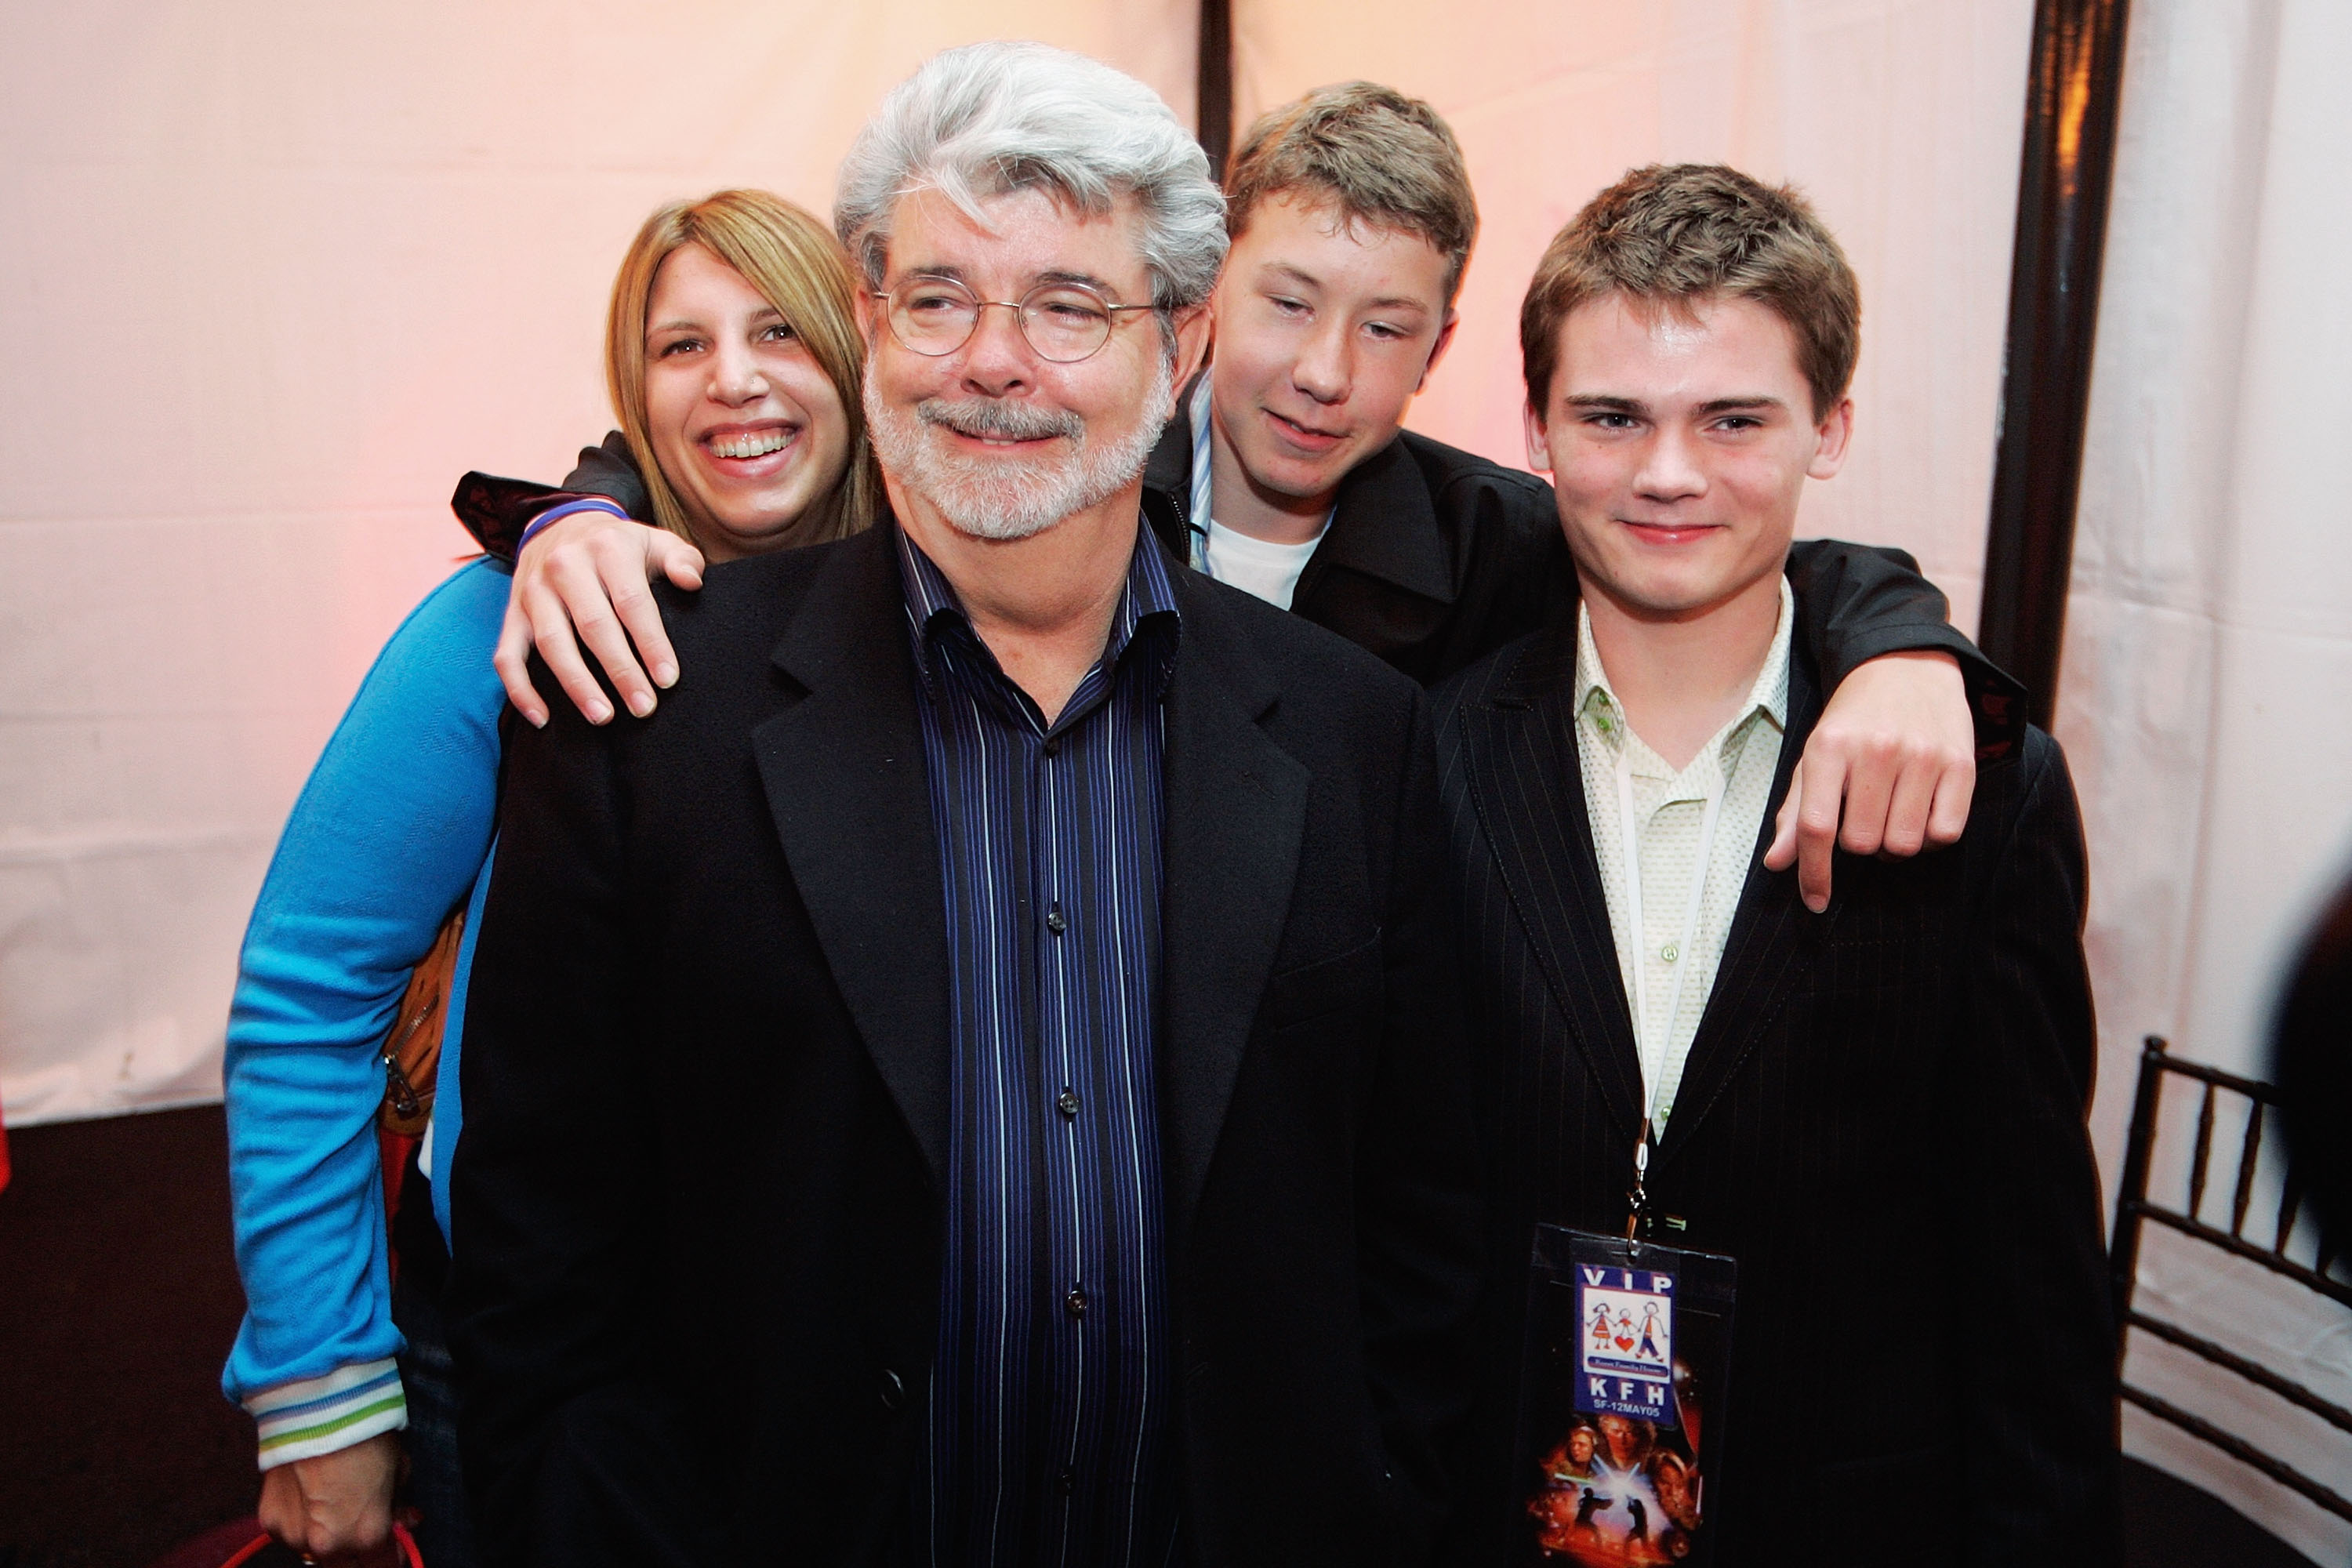 George Lucas director of Star Wars, Amanda Lucas, Jett Lucas and Jake Lloyd on May 12, 2005, in San Francisco, California. | Source: Getty Images